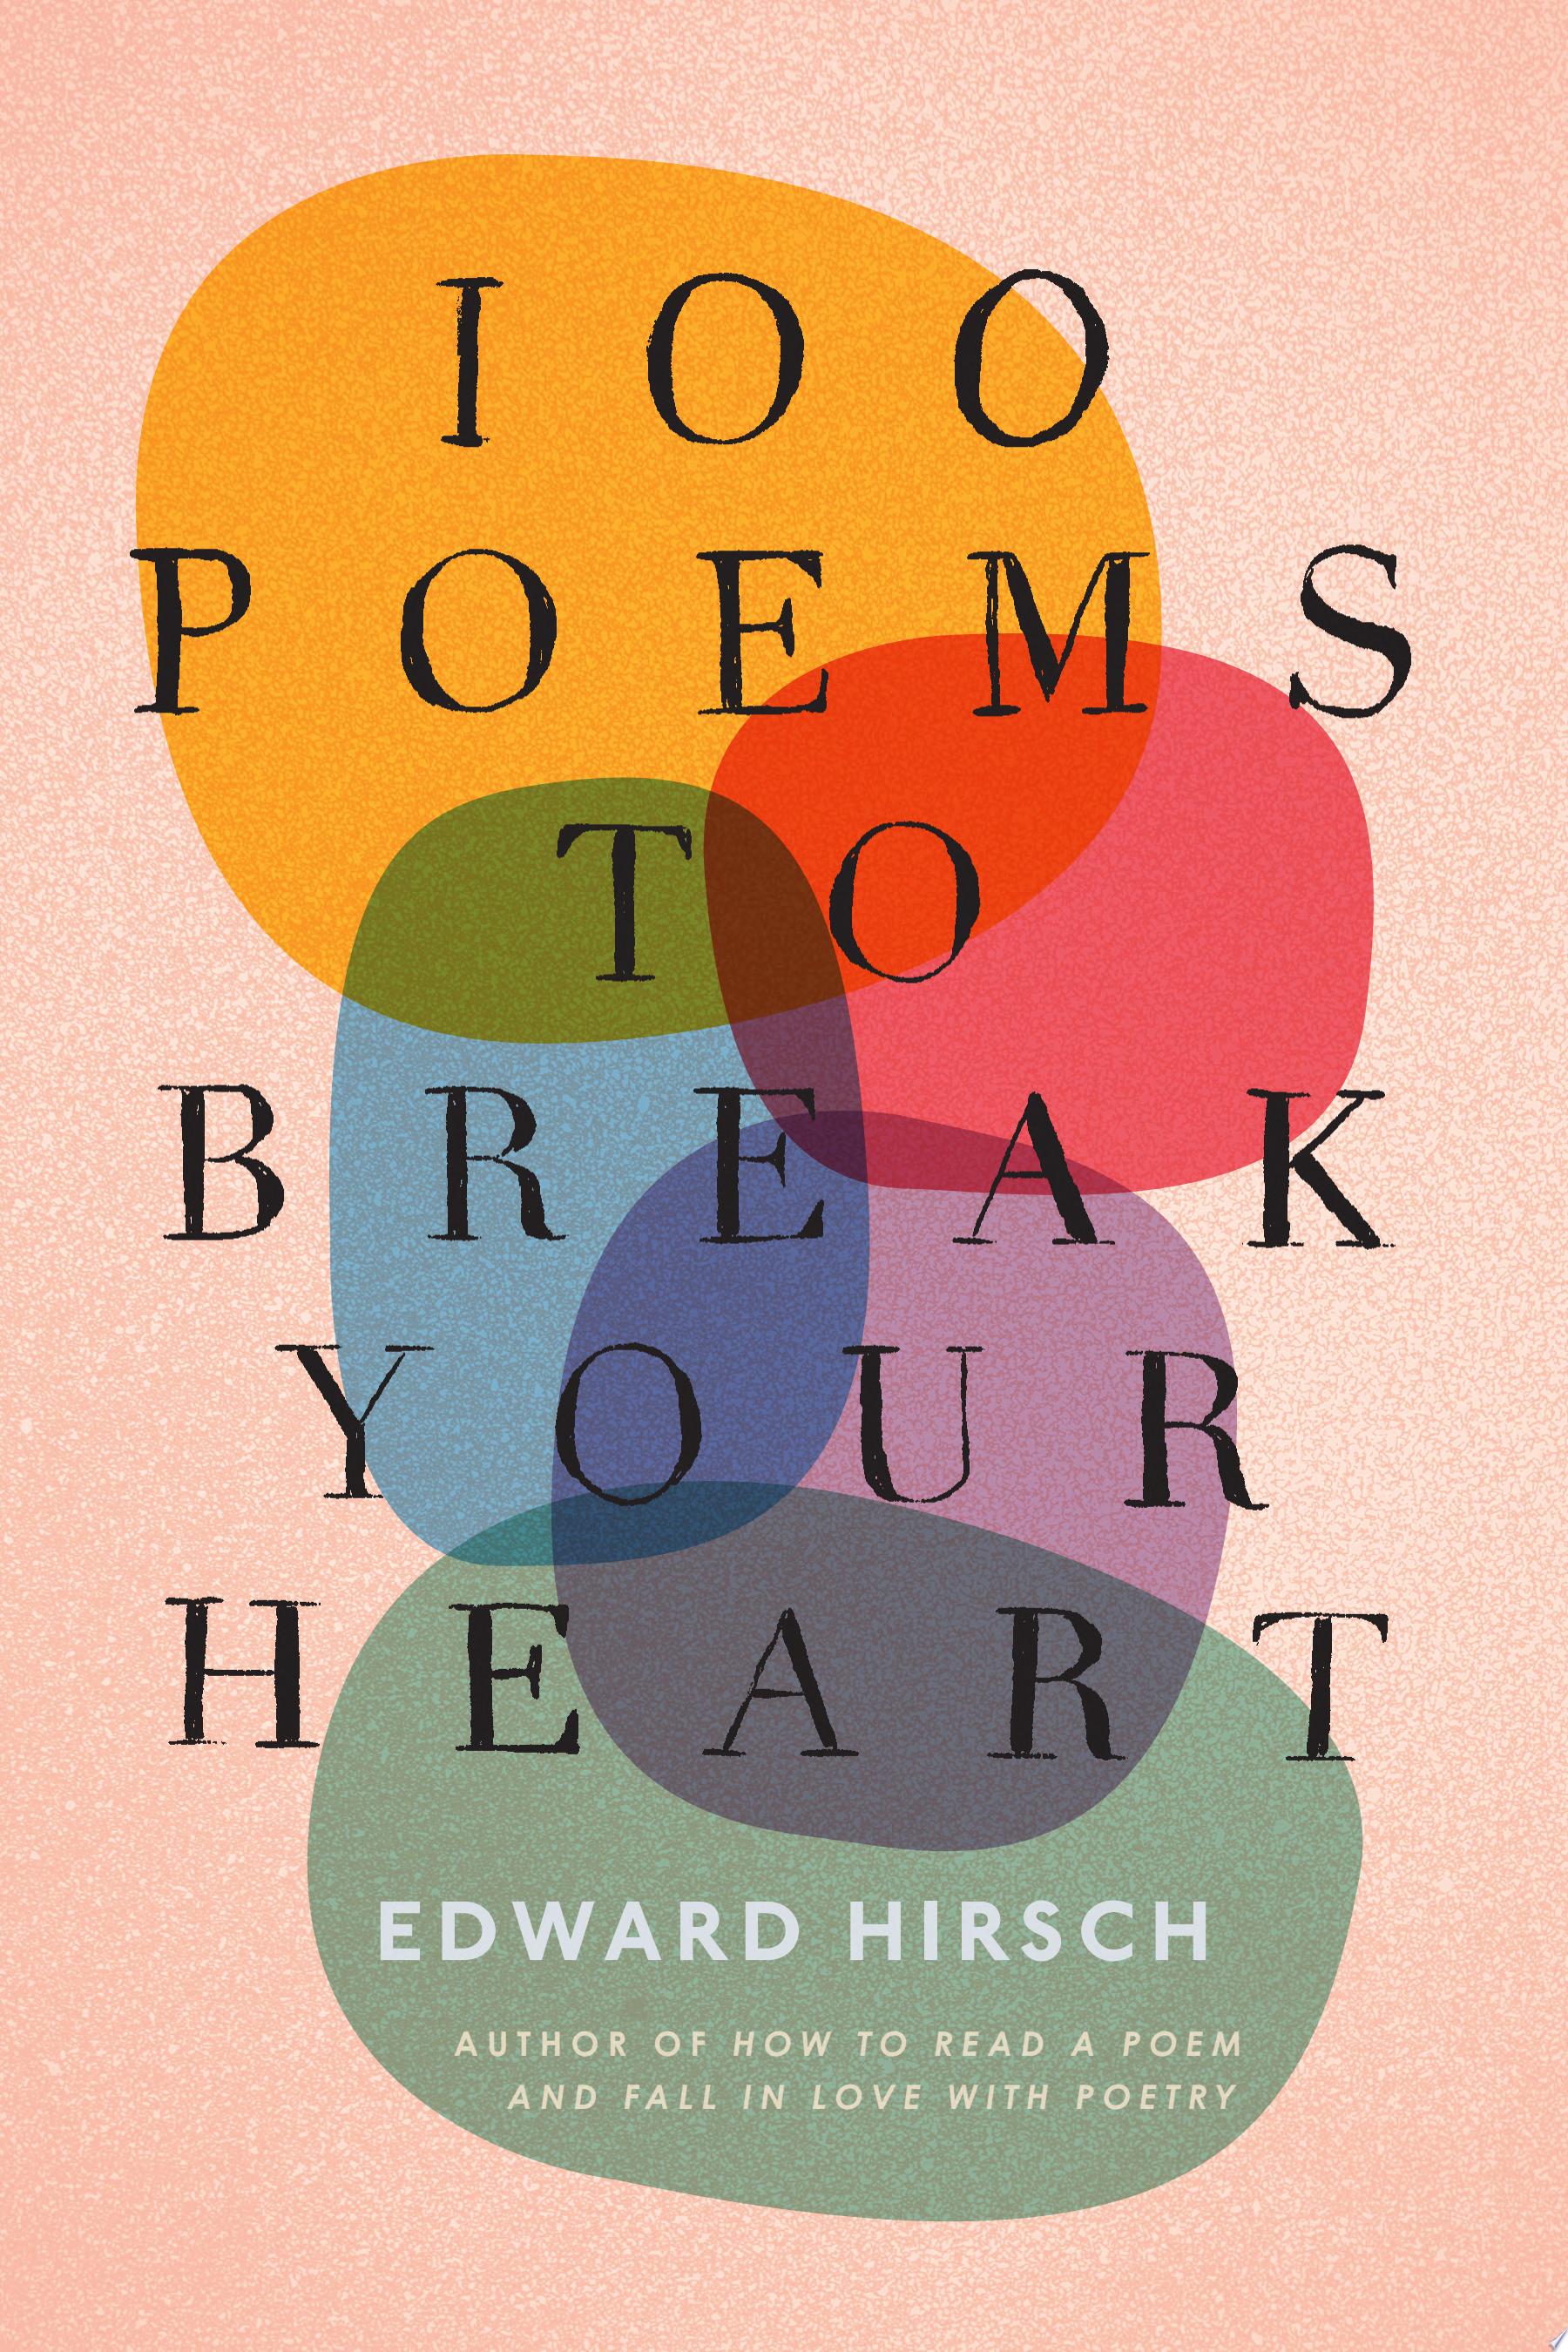 Image for "100 Poems to Break Your Heart"